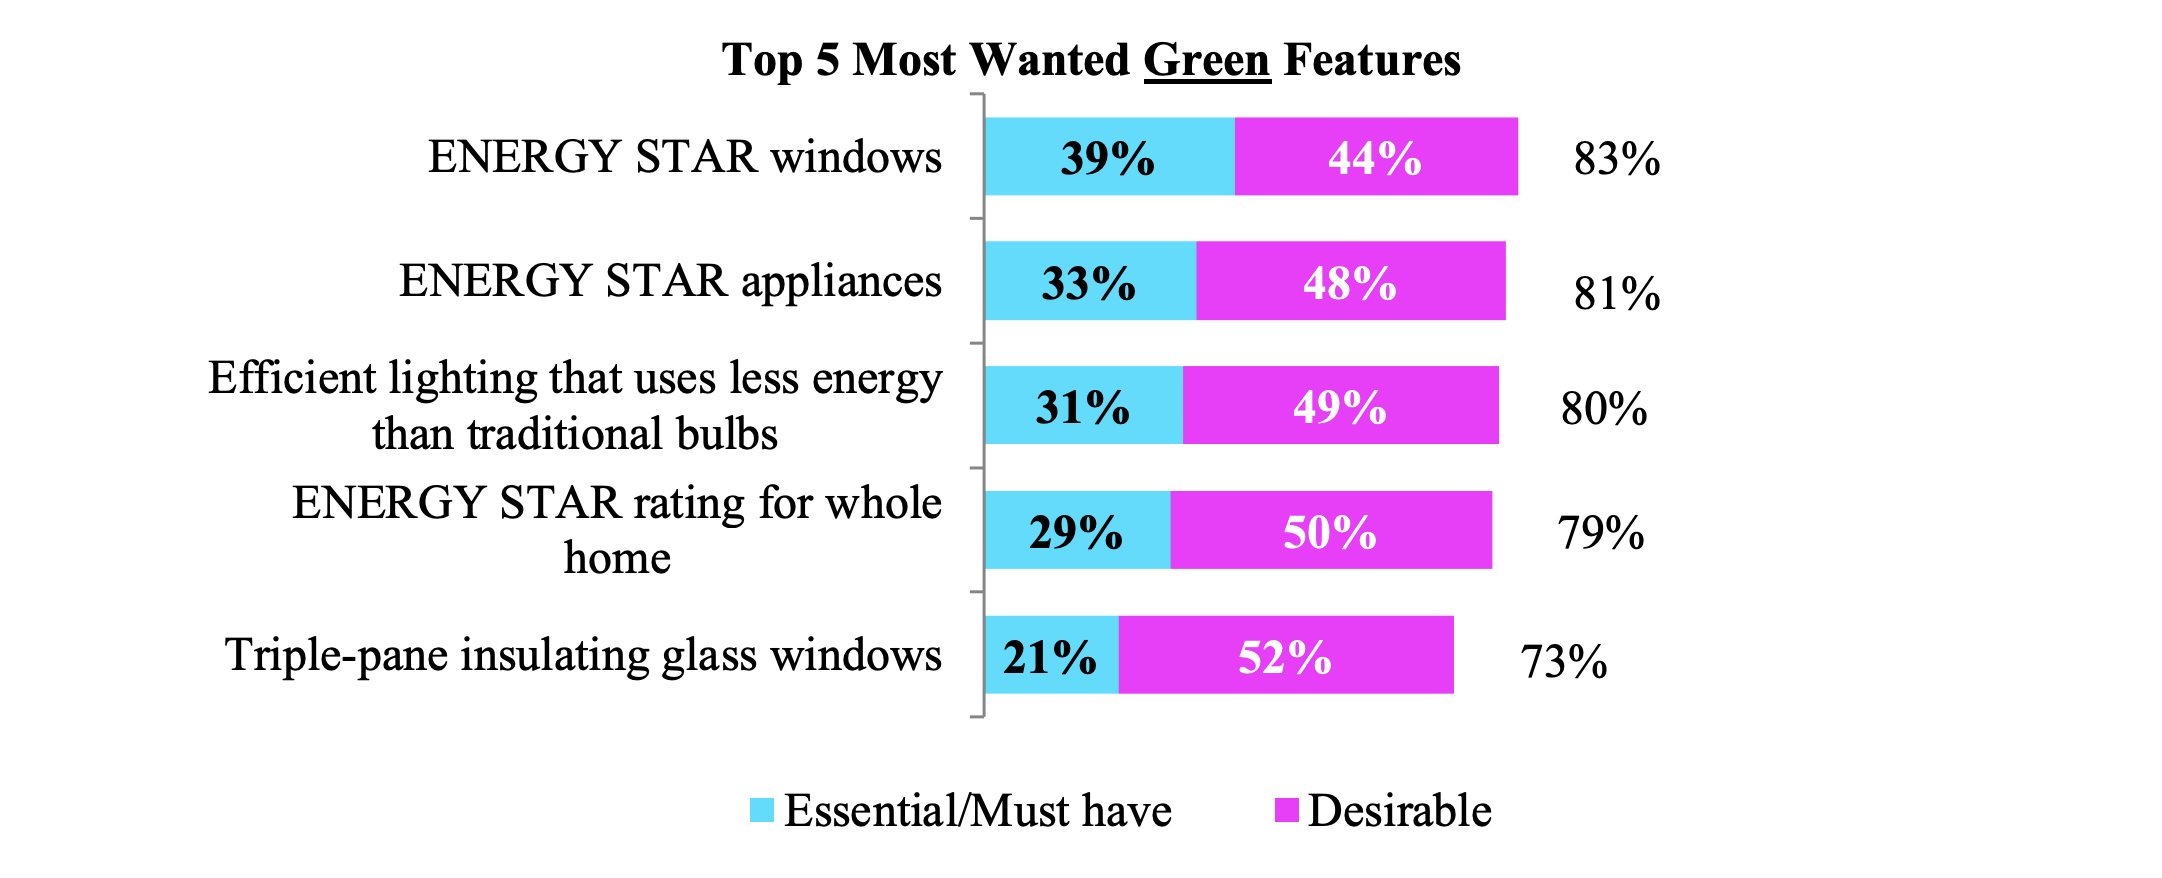 NAHB Top 5 Most Wanted Green Features Results